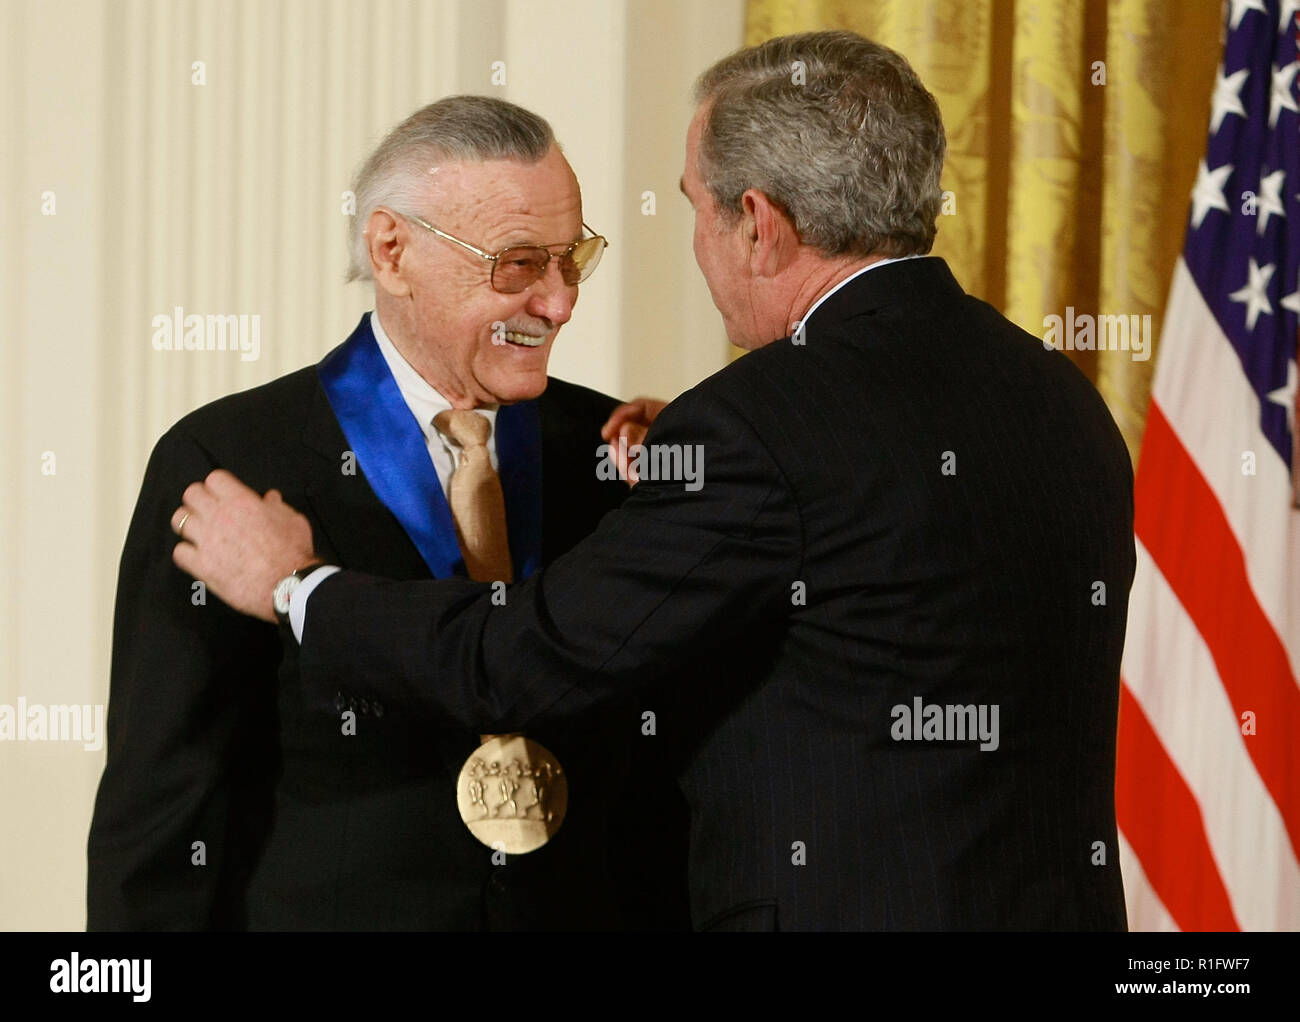 Washington, DC. 17th Nov, 2008. Washington, DC - November 17, 2008 -- United States President George W. Bush congratulates Stan Lee, founder of POW! Entertainment after presenting him with the 2008 National Medals of Arts award during an event in the East Room at the White House on Monday, November 17, 2008 in Washington, DC. During the event president Bush presented recipients with awards for the National Medals of Arts and the National Humanities Medal. Credit: Mark Wilson - Pool via CNP | usage worldwide Credit: dpa/Alamy Live News Stock Photo